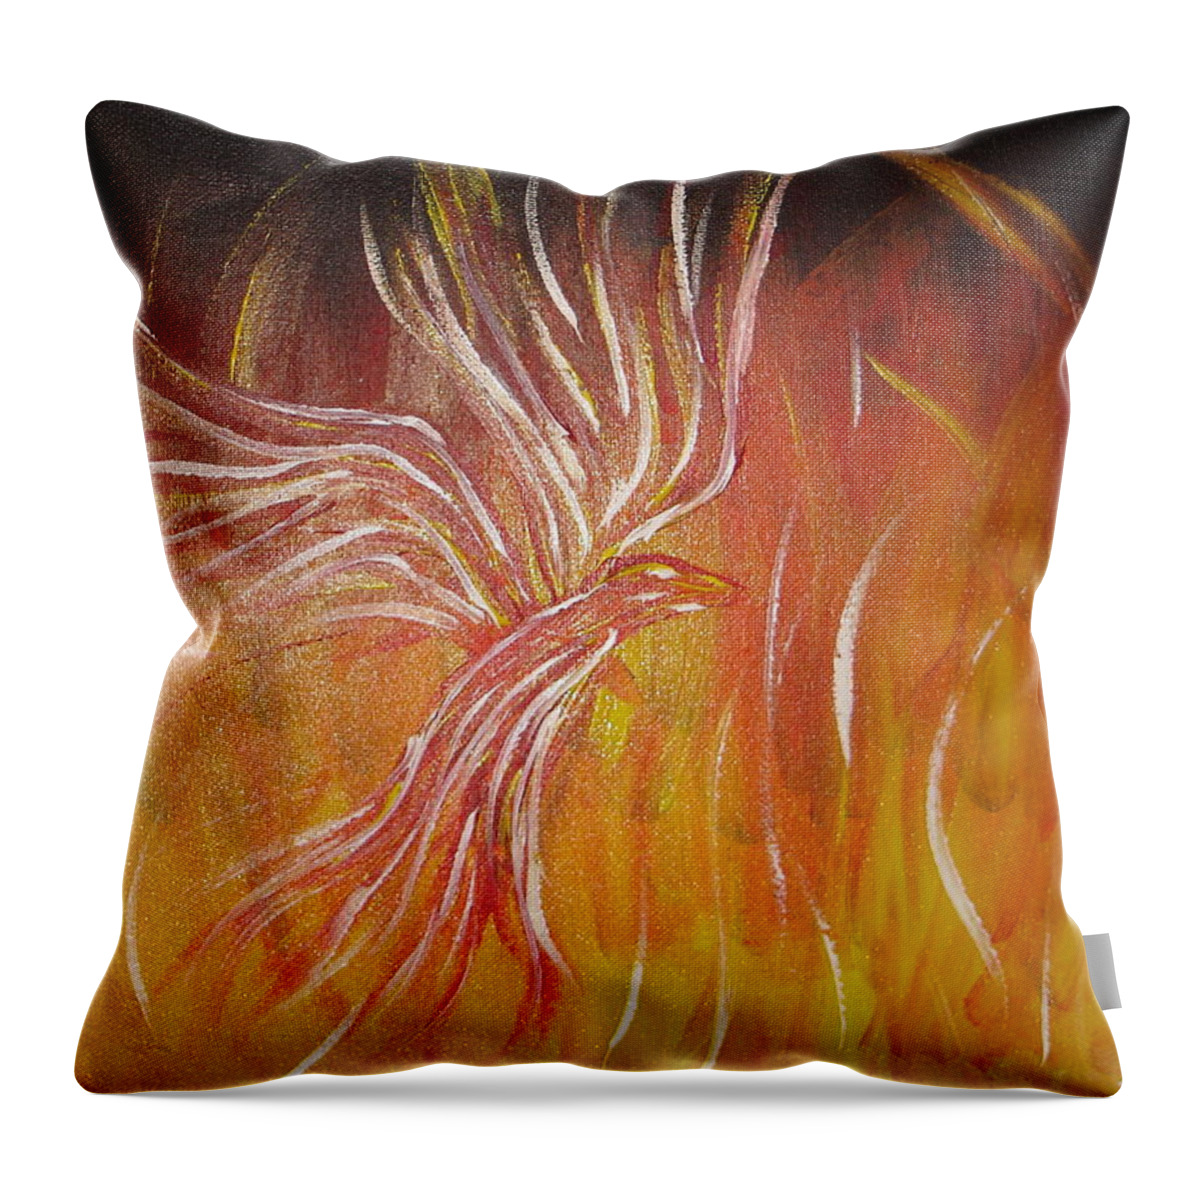 Pheonix Throw Pillow featuring the painting Pheonix Rising by Angie Butler